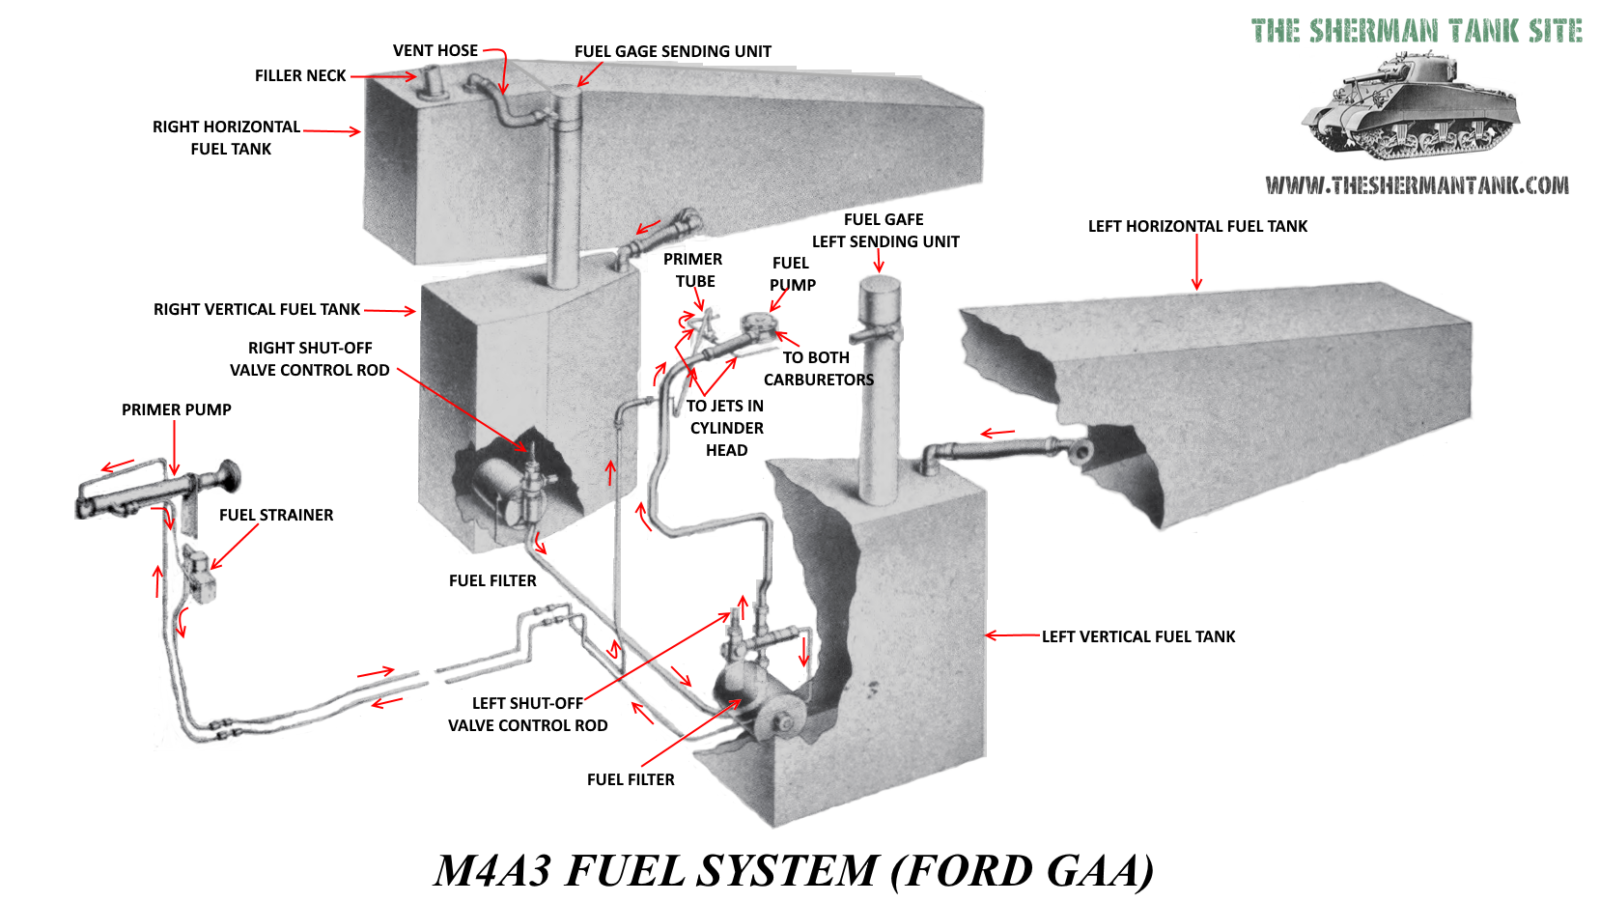 ford-GAA-fuel-system-A3-tanks-improved-F